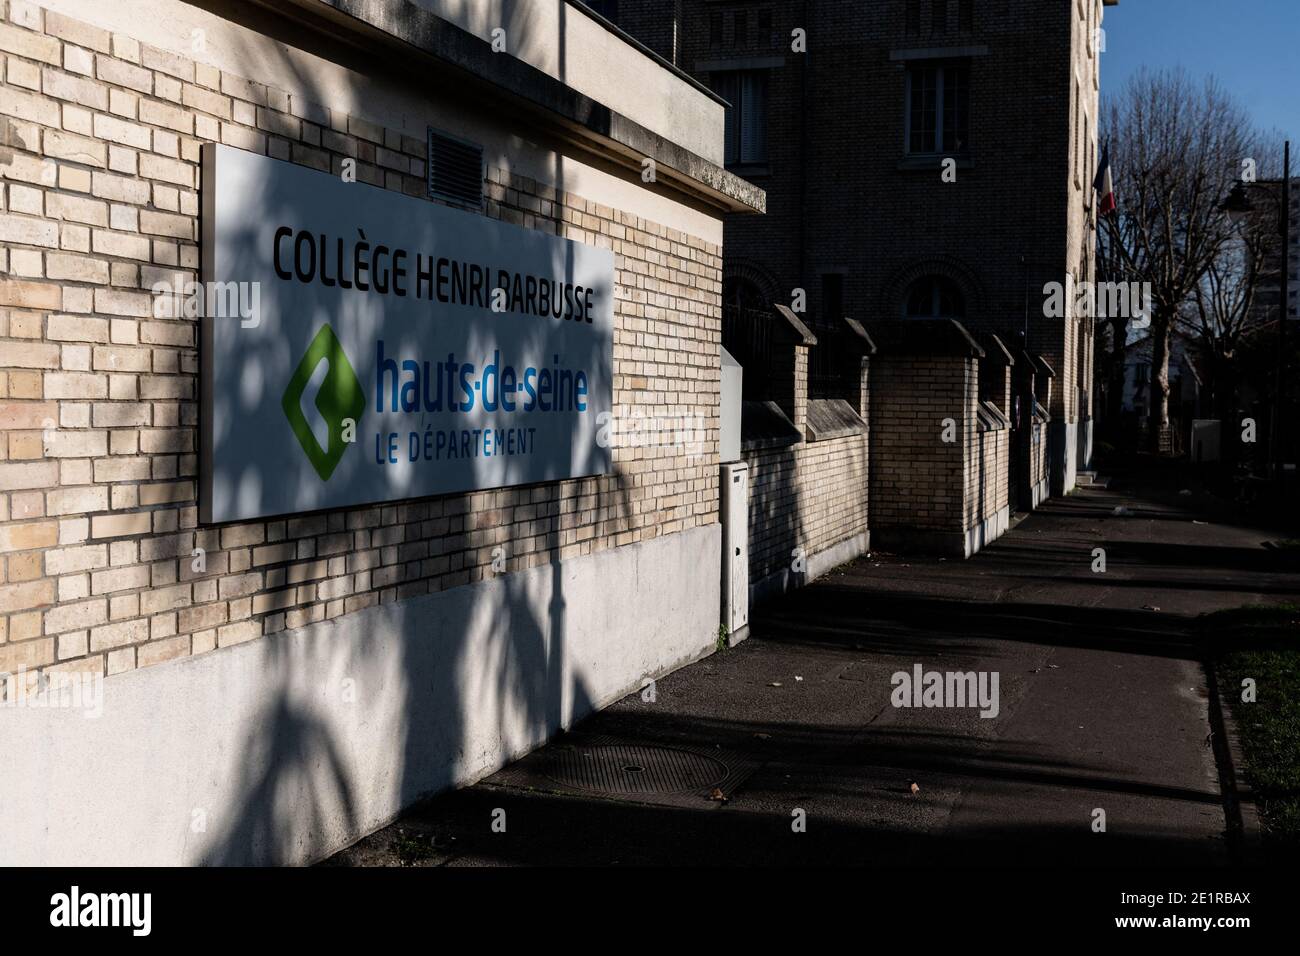 The high school Henri Barbusse in Bagneux, near where a British version of COVID case was detected. Bagneux, France, January 9th, 2021. Photo by Daniel Derajinski/ABACAPRESS.COM Stock Photo